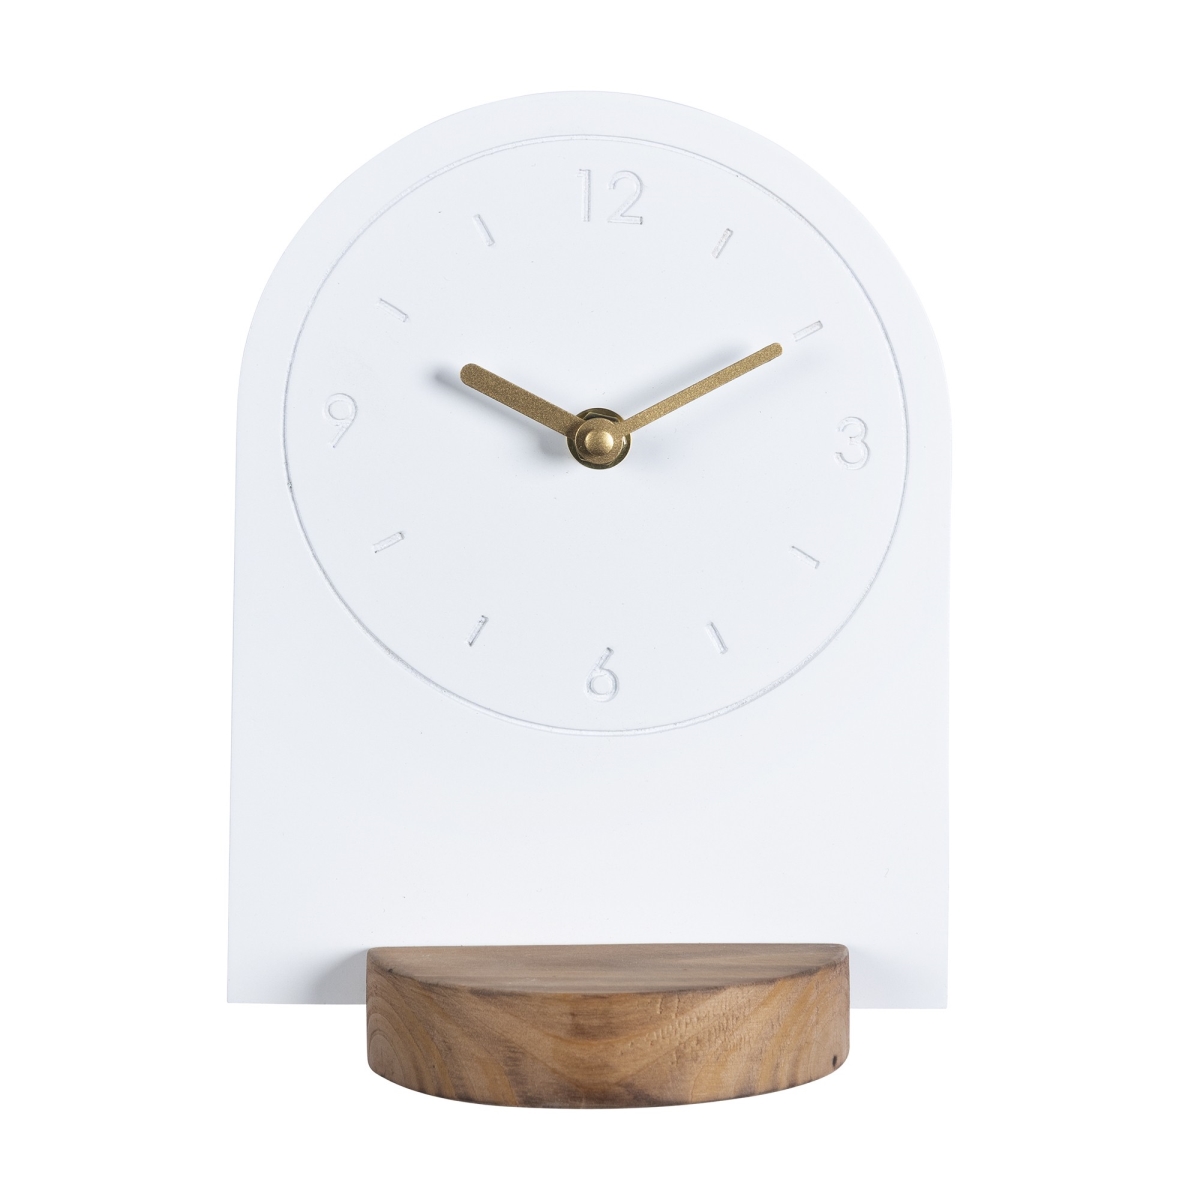 Picture of HomeRoots 389330 8.25 x 6 x 4 in. Sleek White Table or Desk Clock